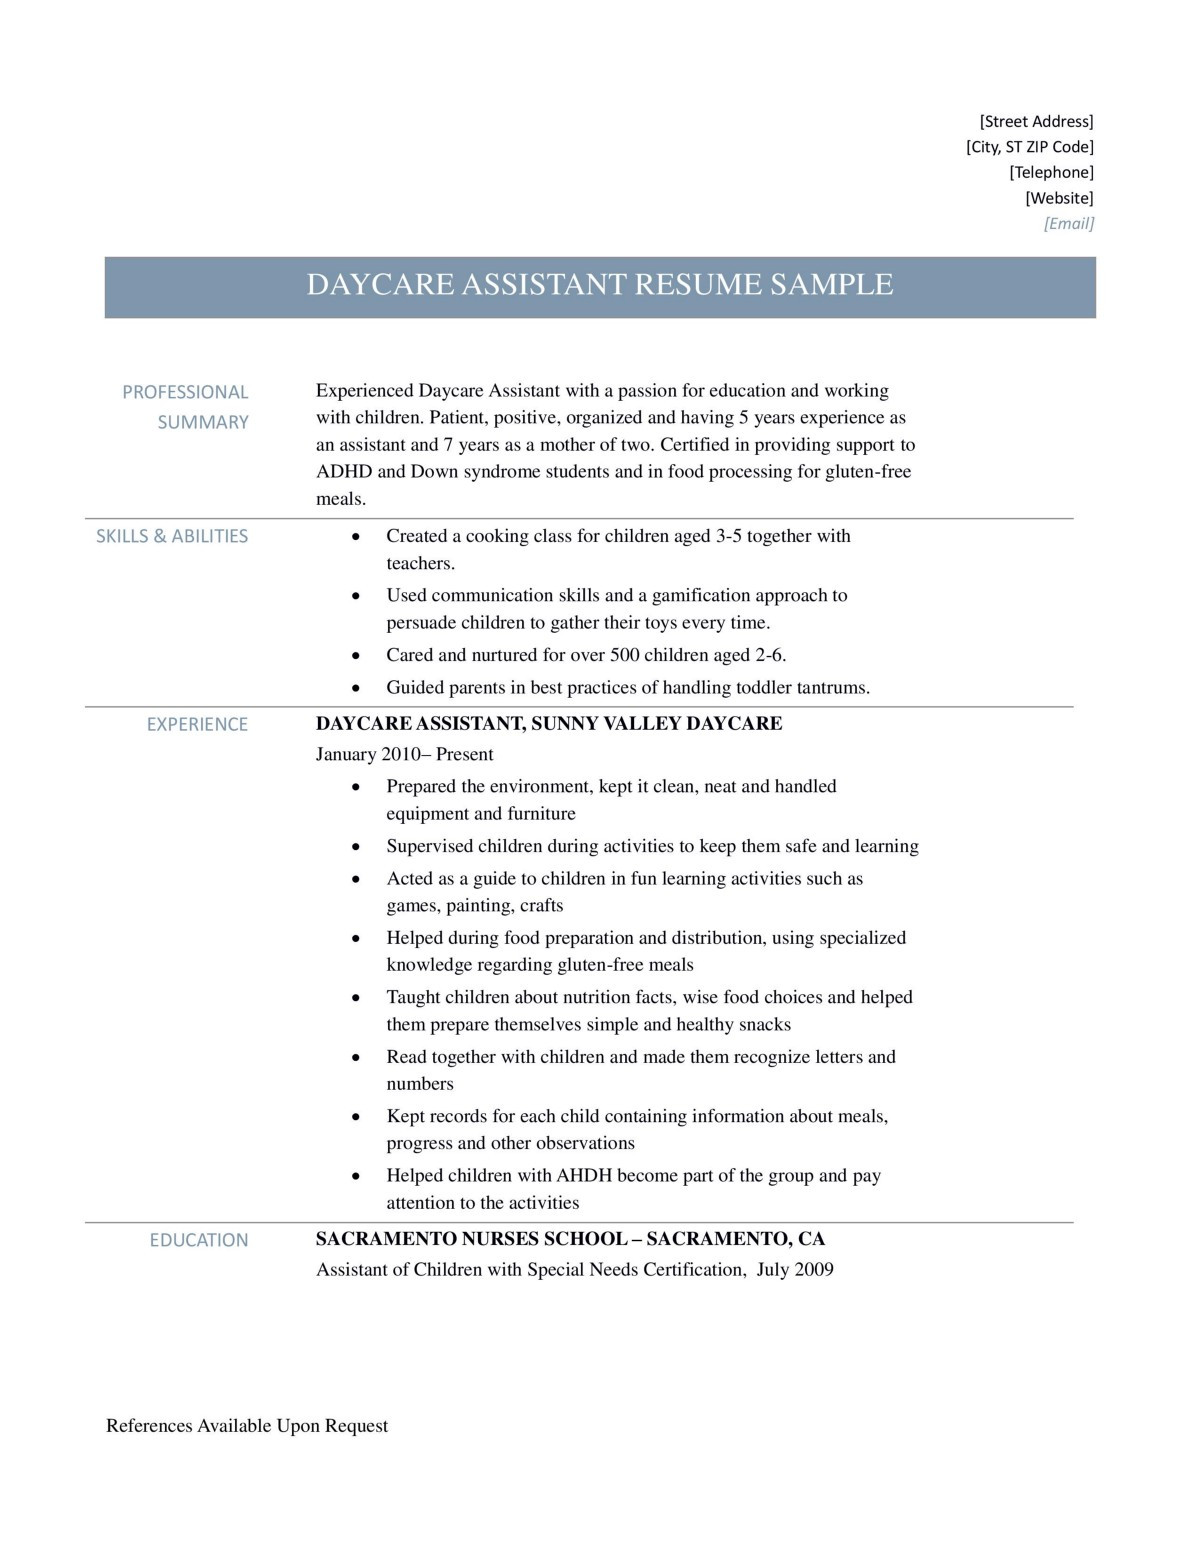 daycare assistant resume samples tips and templates f a10c6